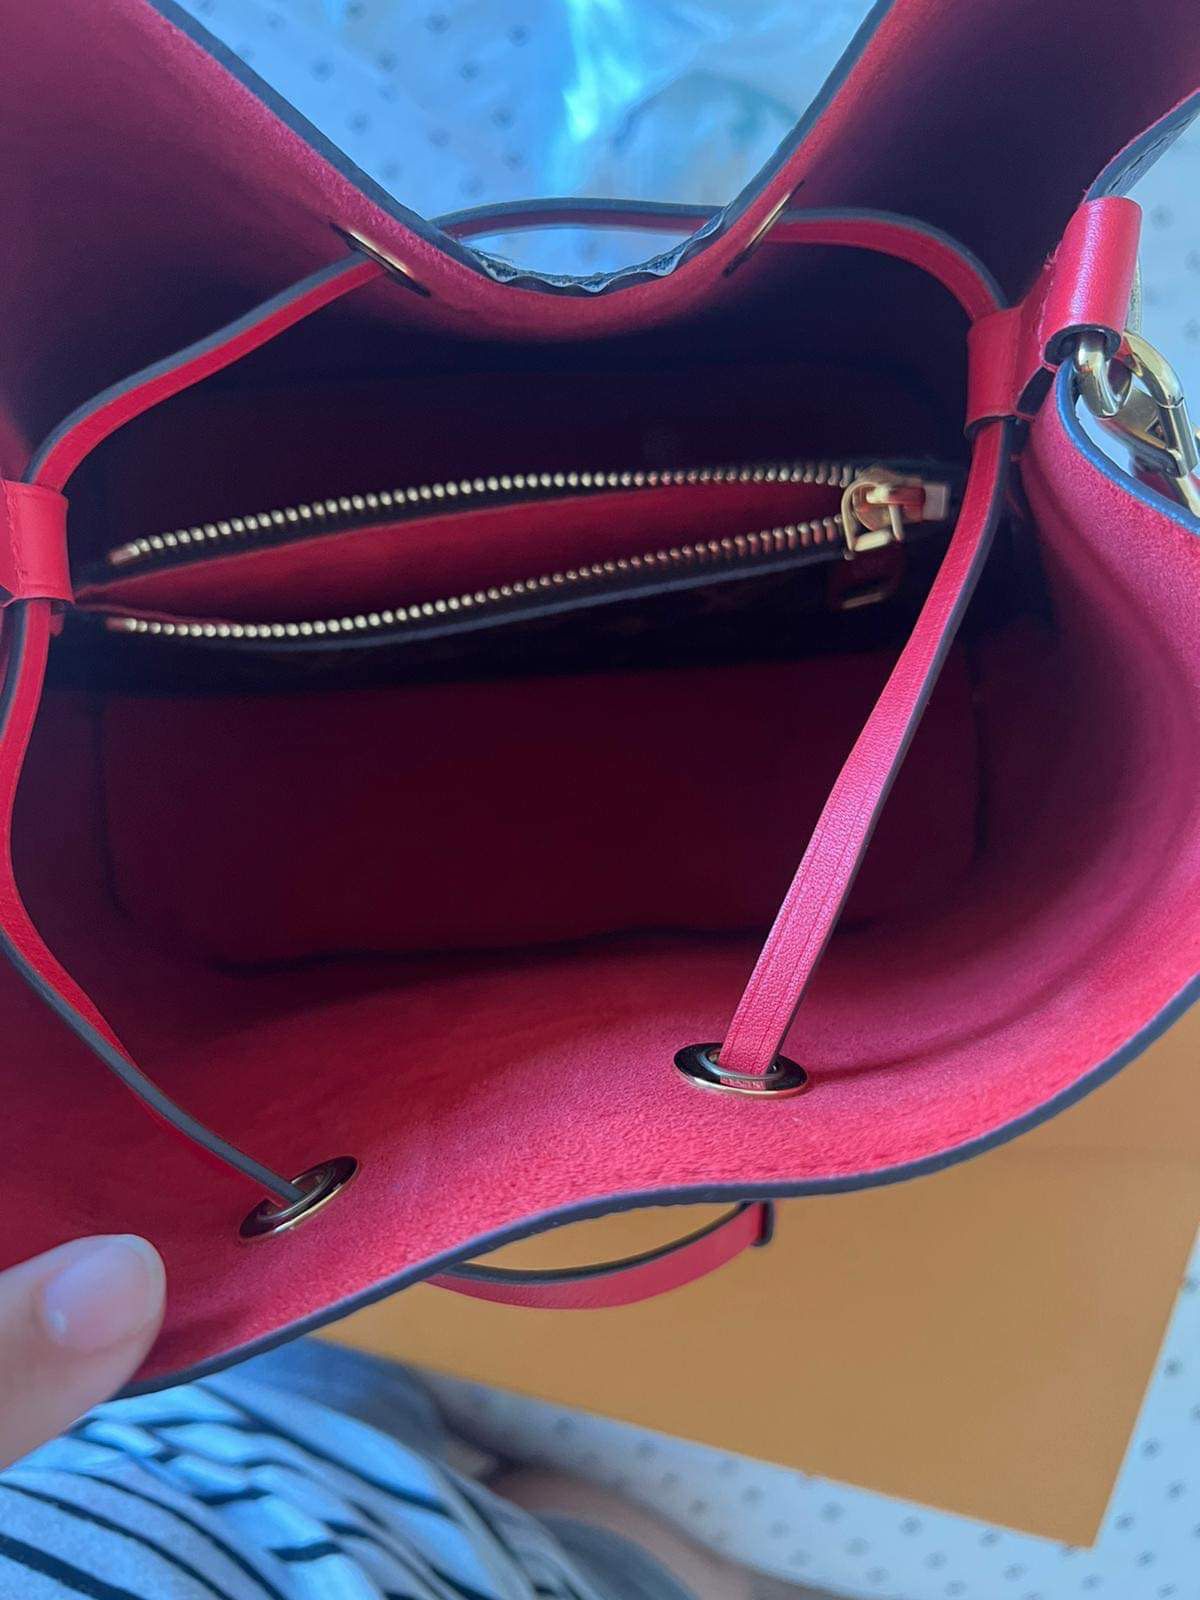 LOUIS VUITTON Sully MM Bag for Sale in Irvine, CA - OfferUp